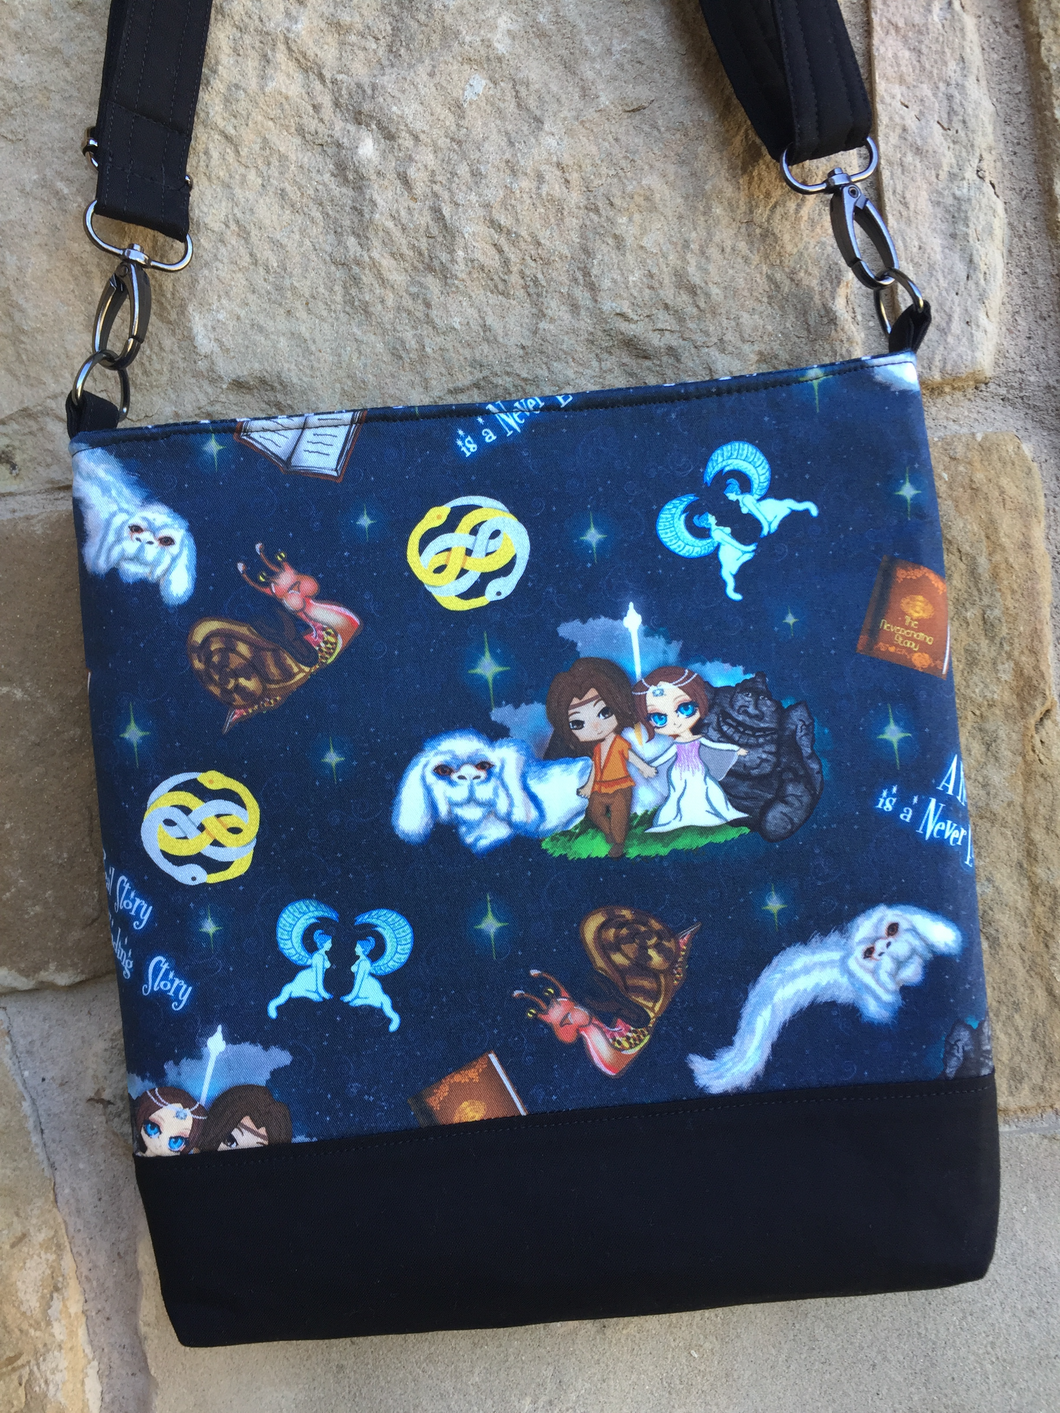 Messenger Bag Made With A Real Story Inspired Fabric - Adjustable Strap - Zippered Closure - Zippered Pocket - Cross Body Bag